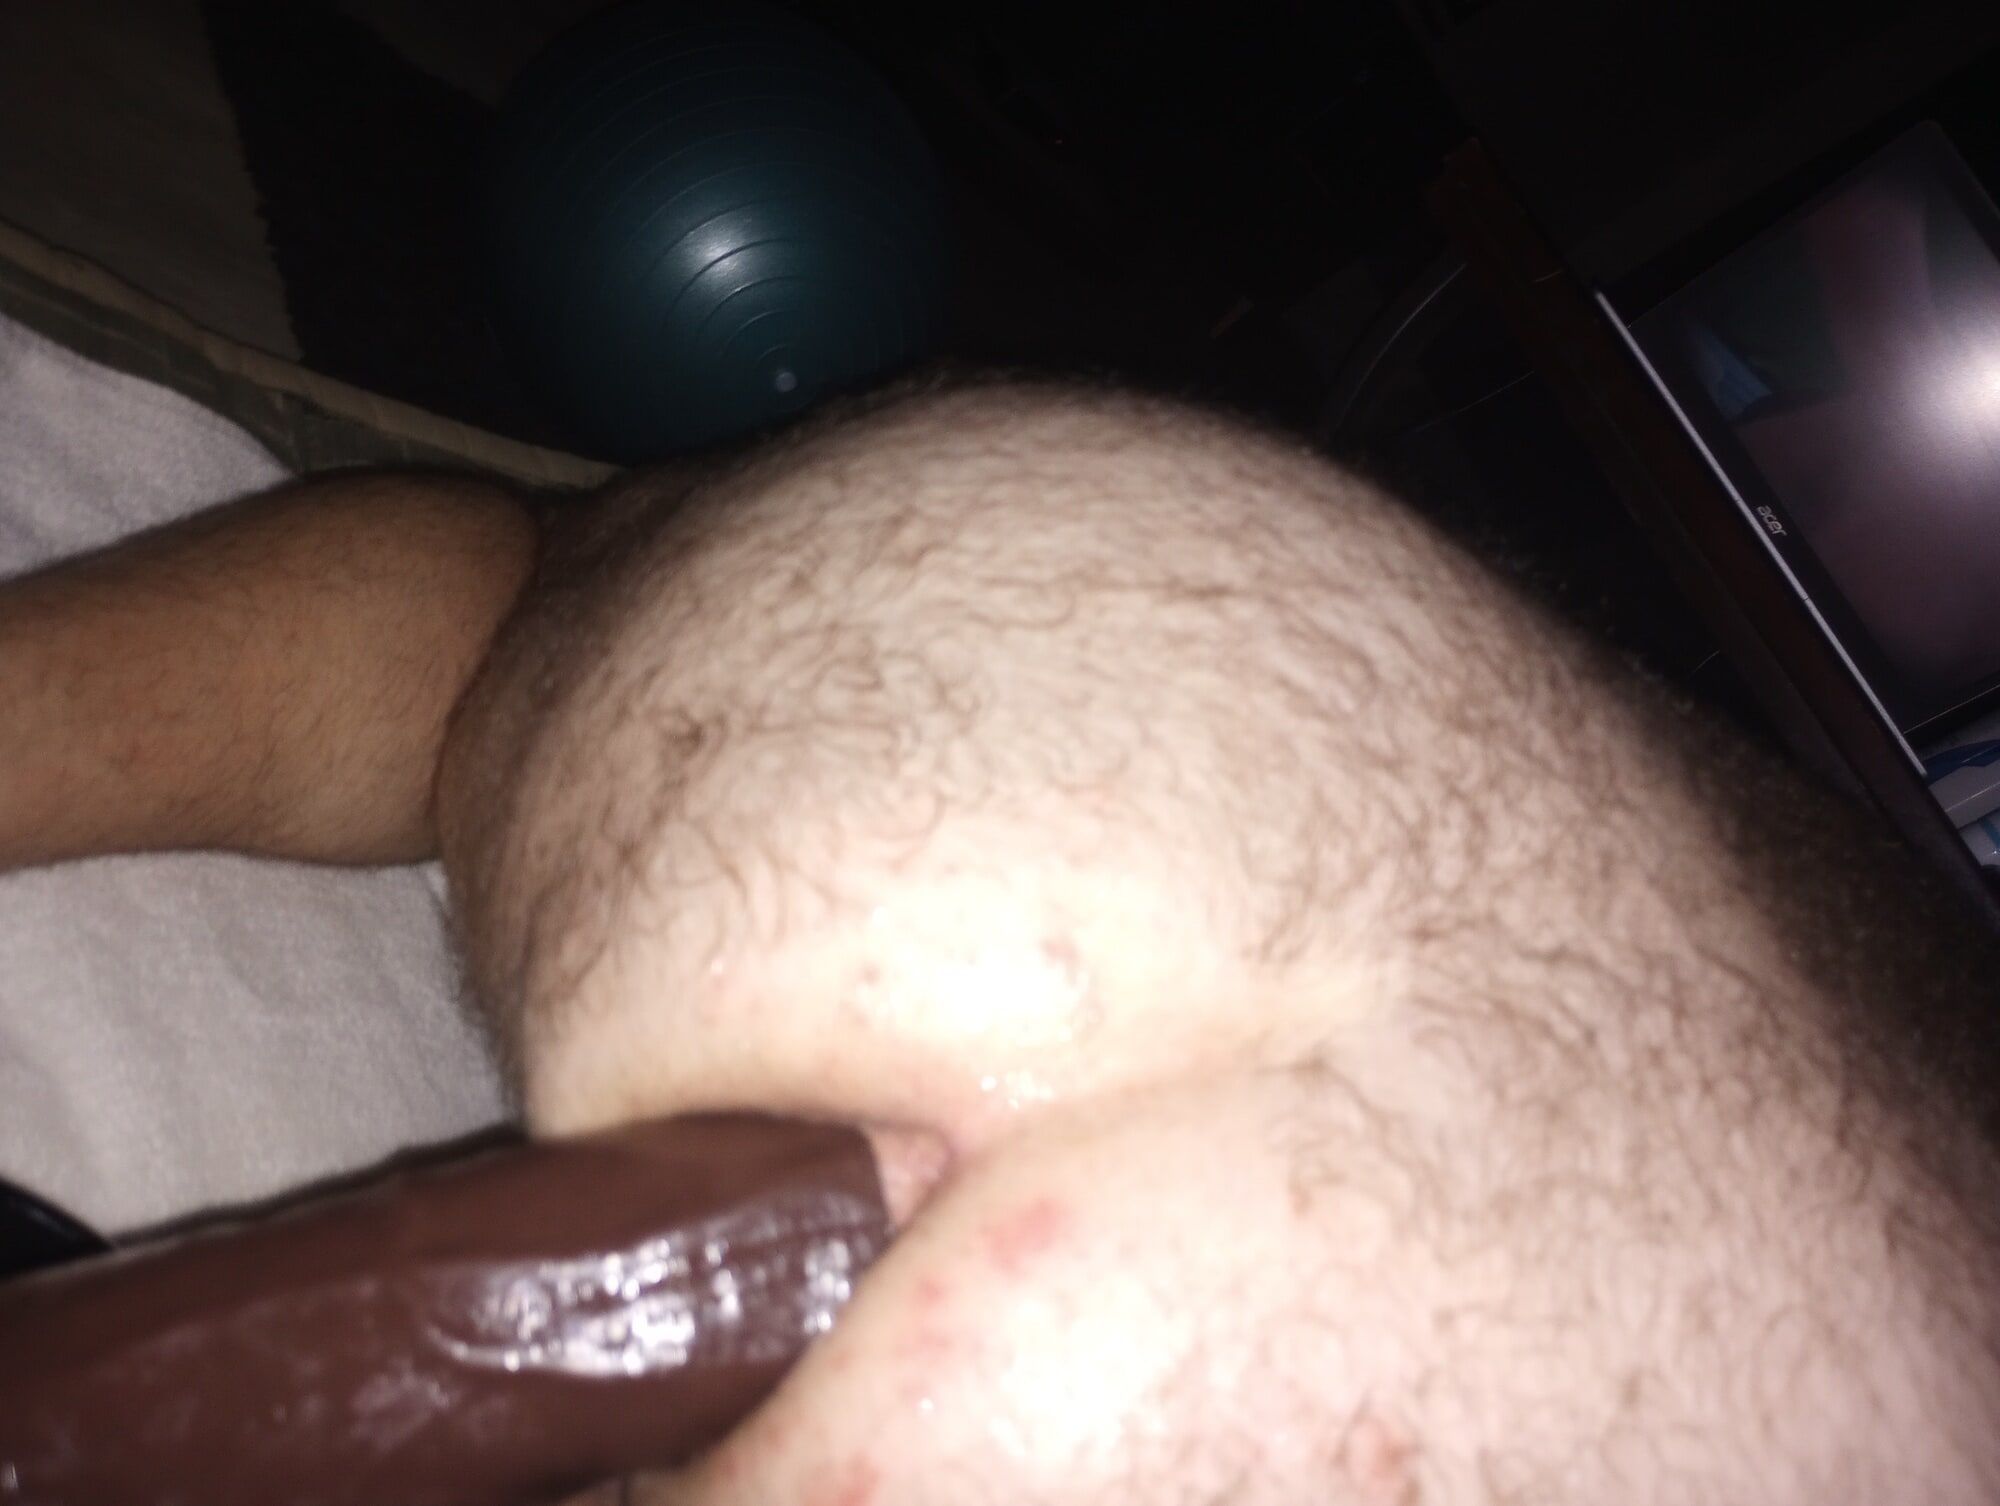 More dildos gaping my hole #5